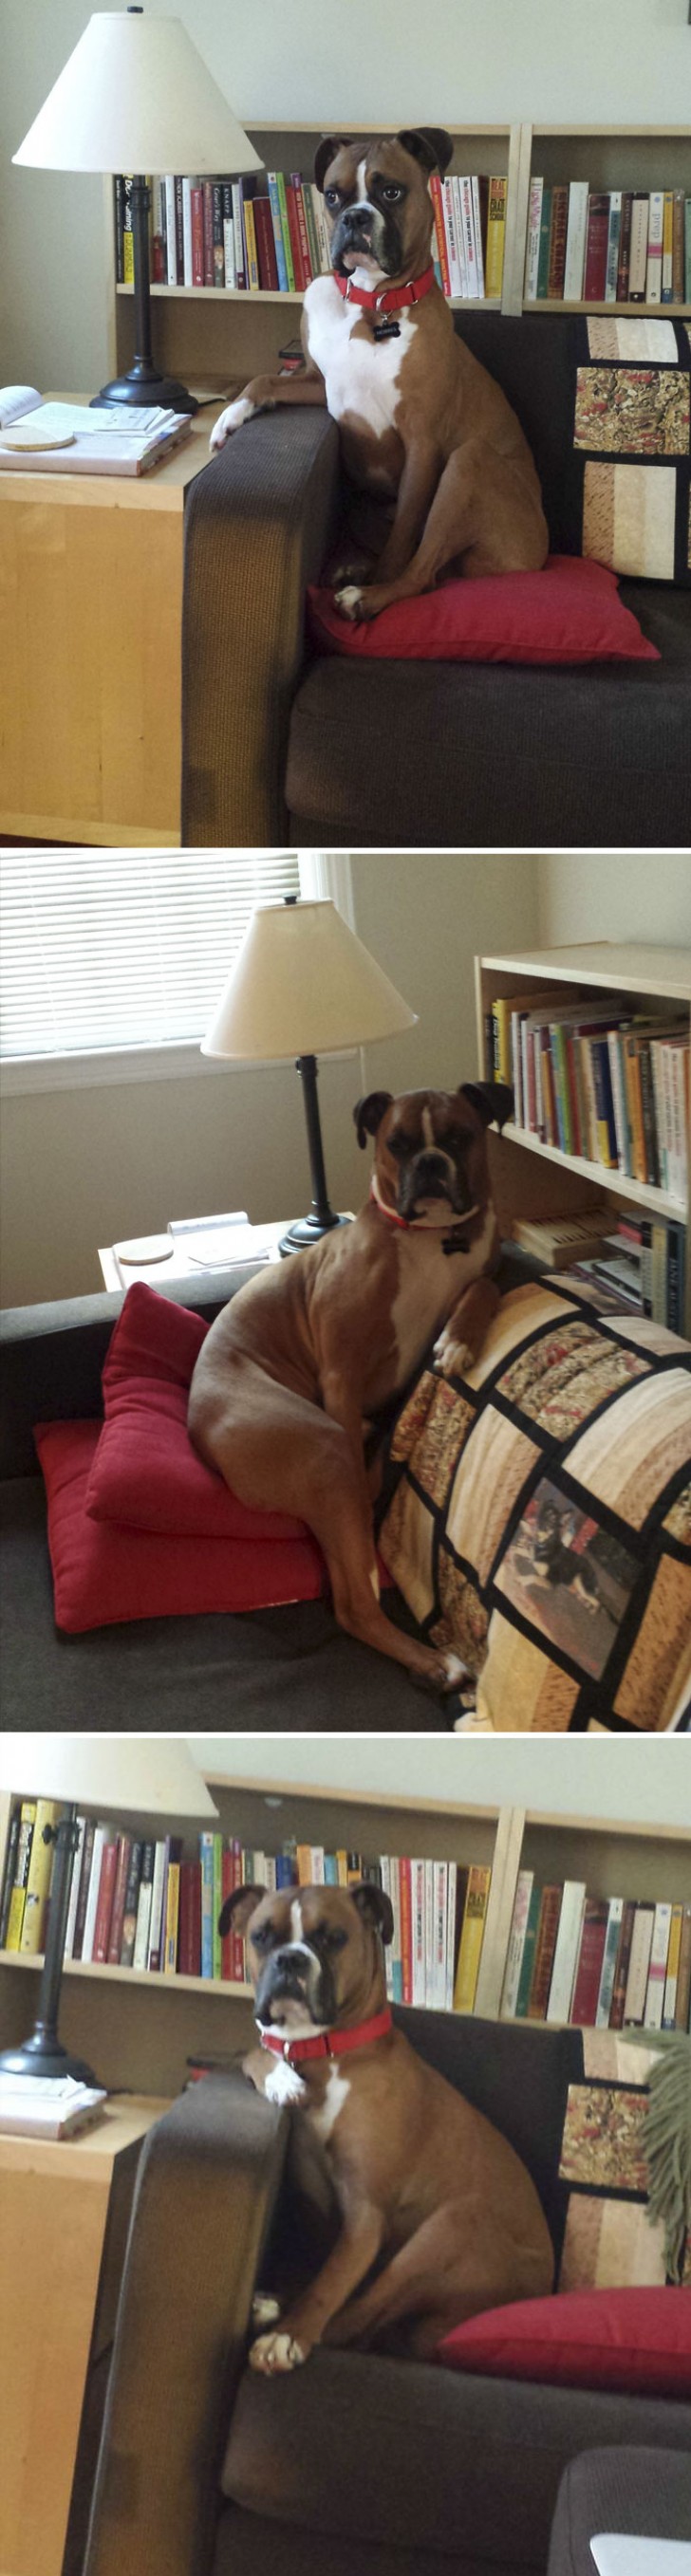 Did you know that when it comes to sofas, Boxer dogs RULE!